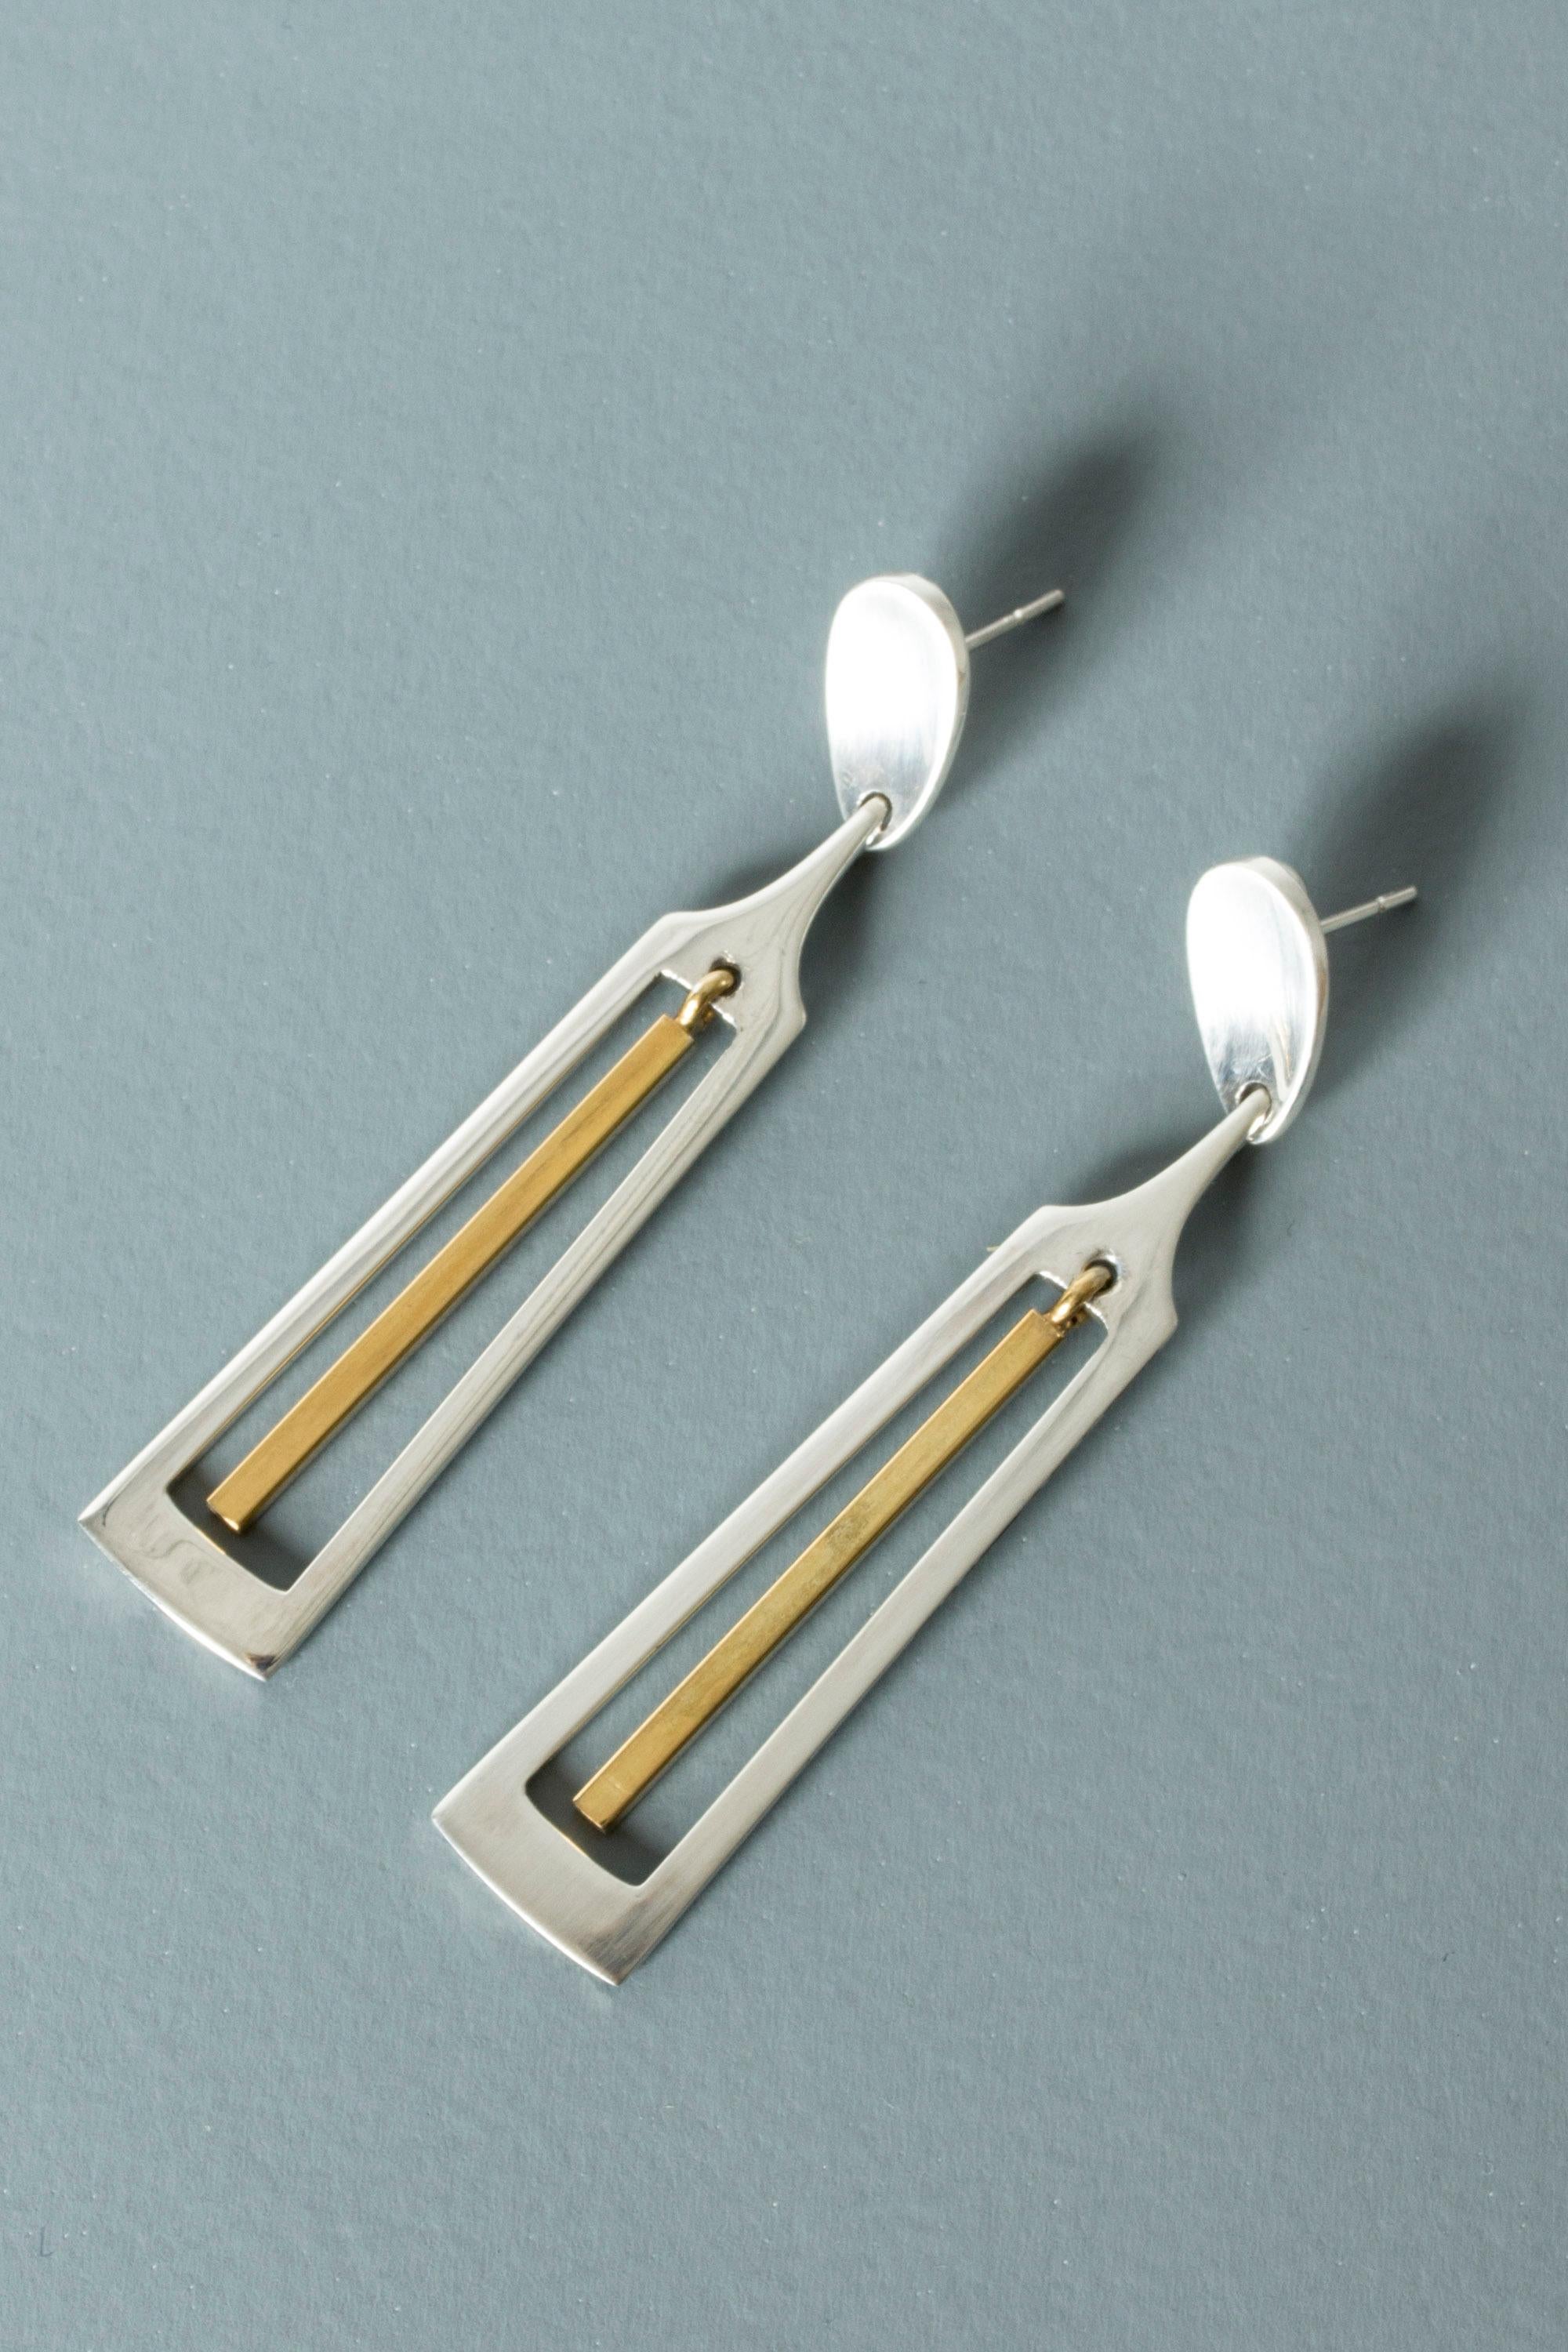 Pair of amazing, oversized earrings by Bent Gabrielsen Pedersen. Made from silver with a gilded pendant in the cutout middle. Strikingly cool design.